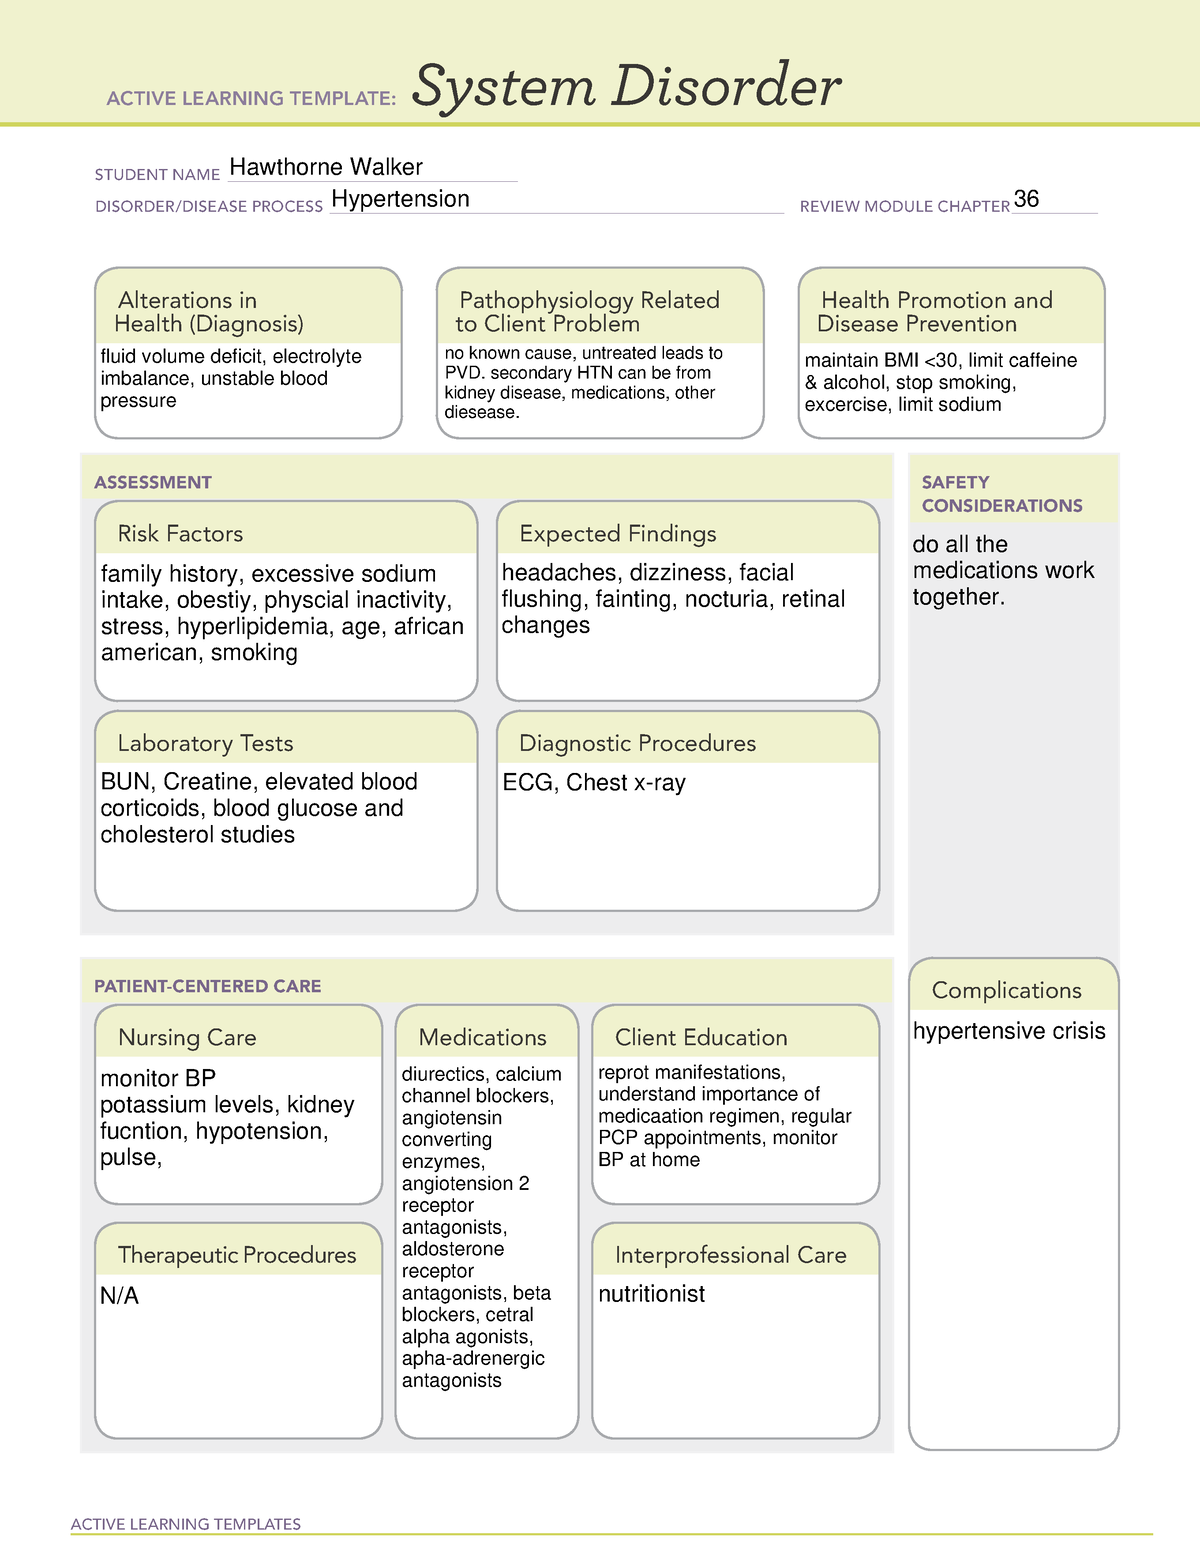 hypertension-ati-system-disorder-template-active-learning-templates-system-disorder-student